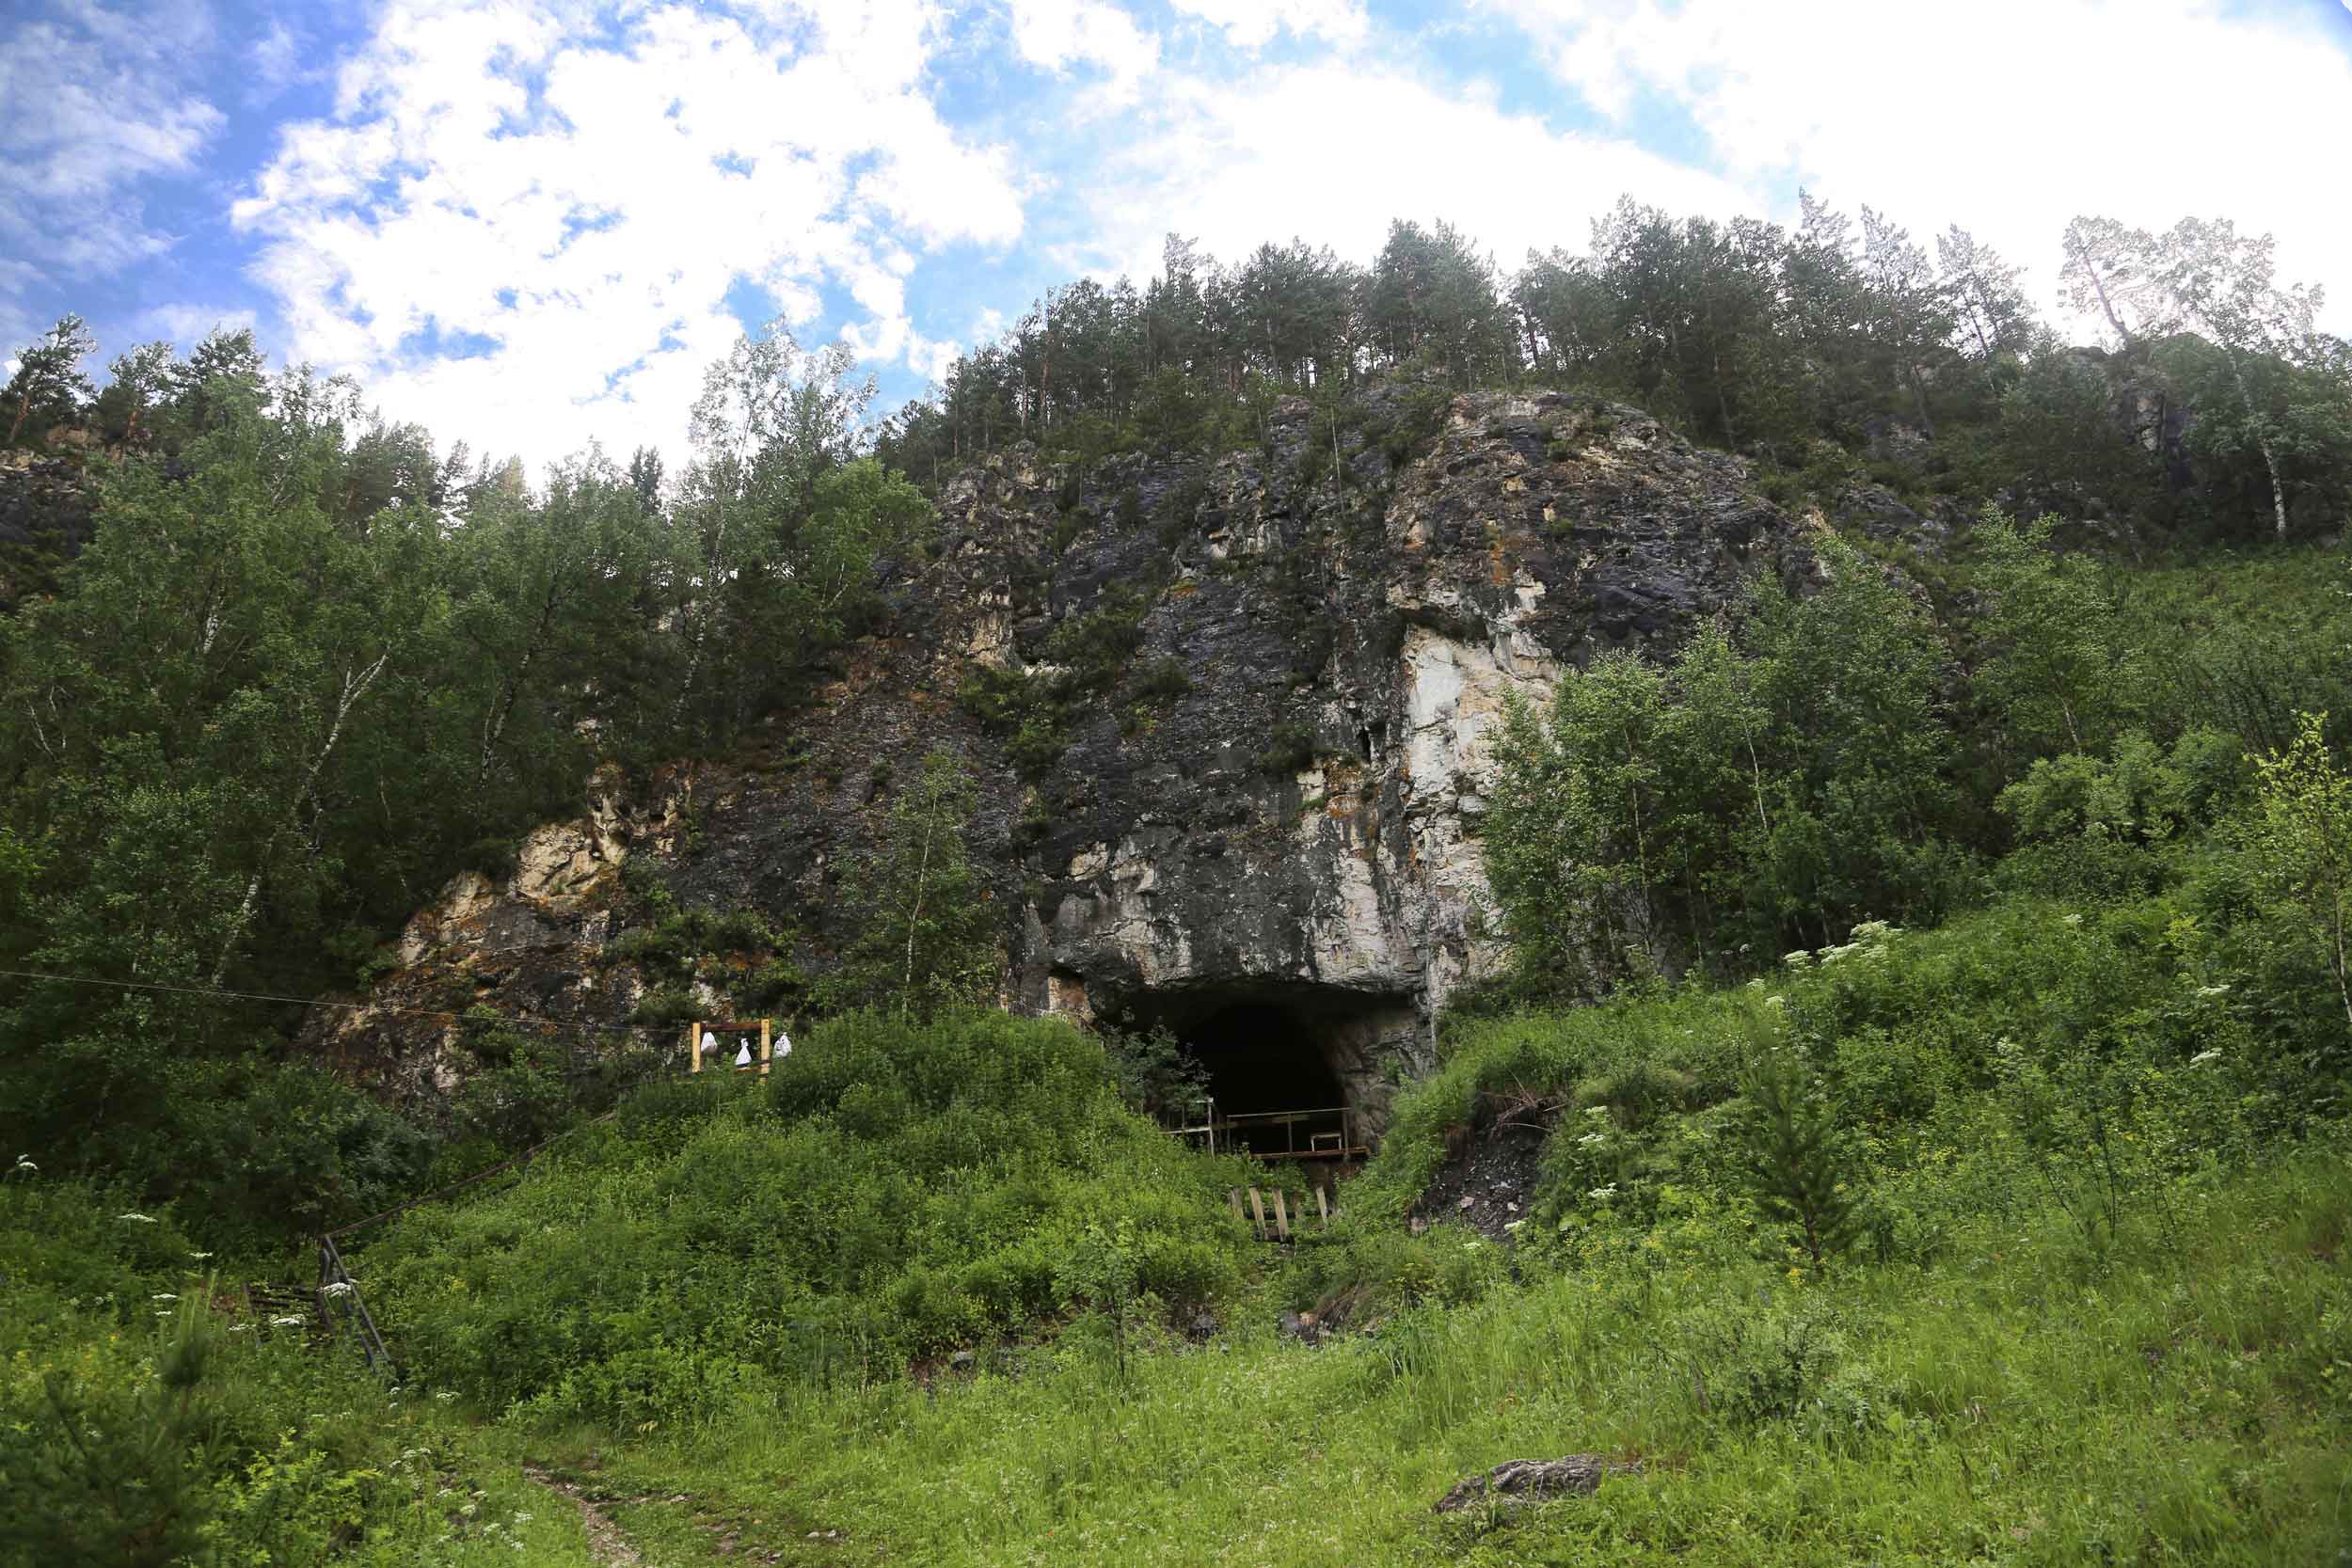 A cave opening in a gray rockface surrounded by greenery